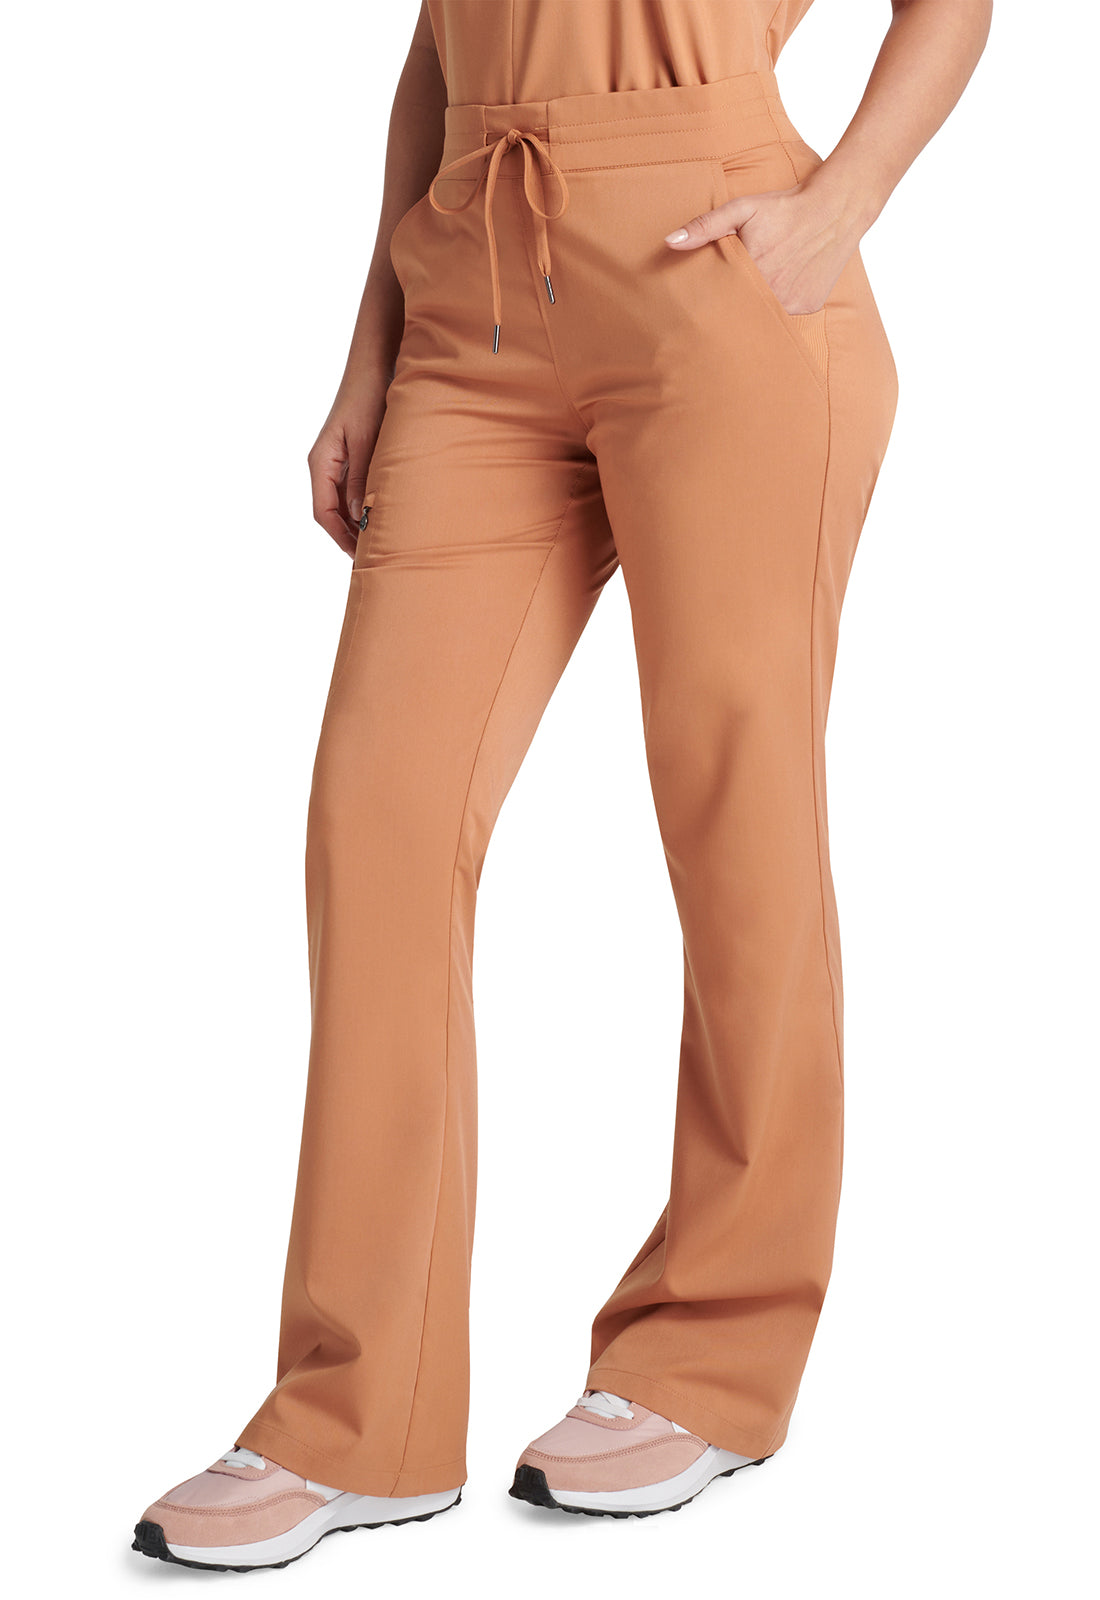 Clearance Limited Edition by Healing Hands Women's Kennedy Jogger